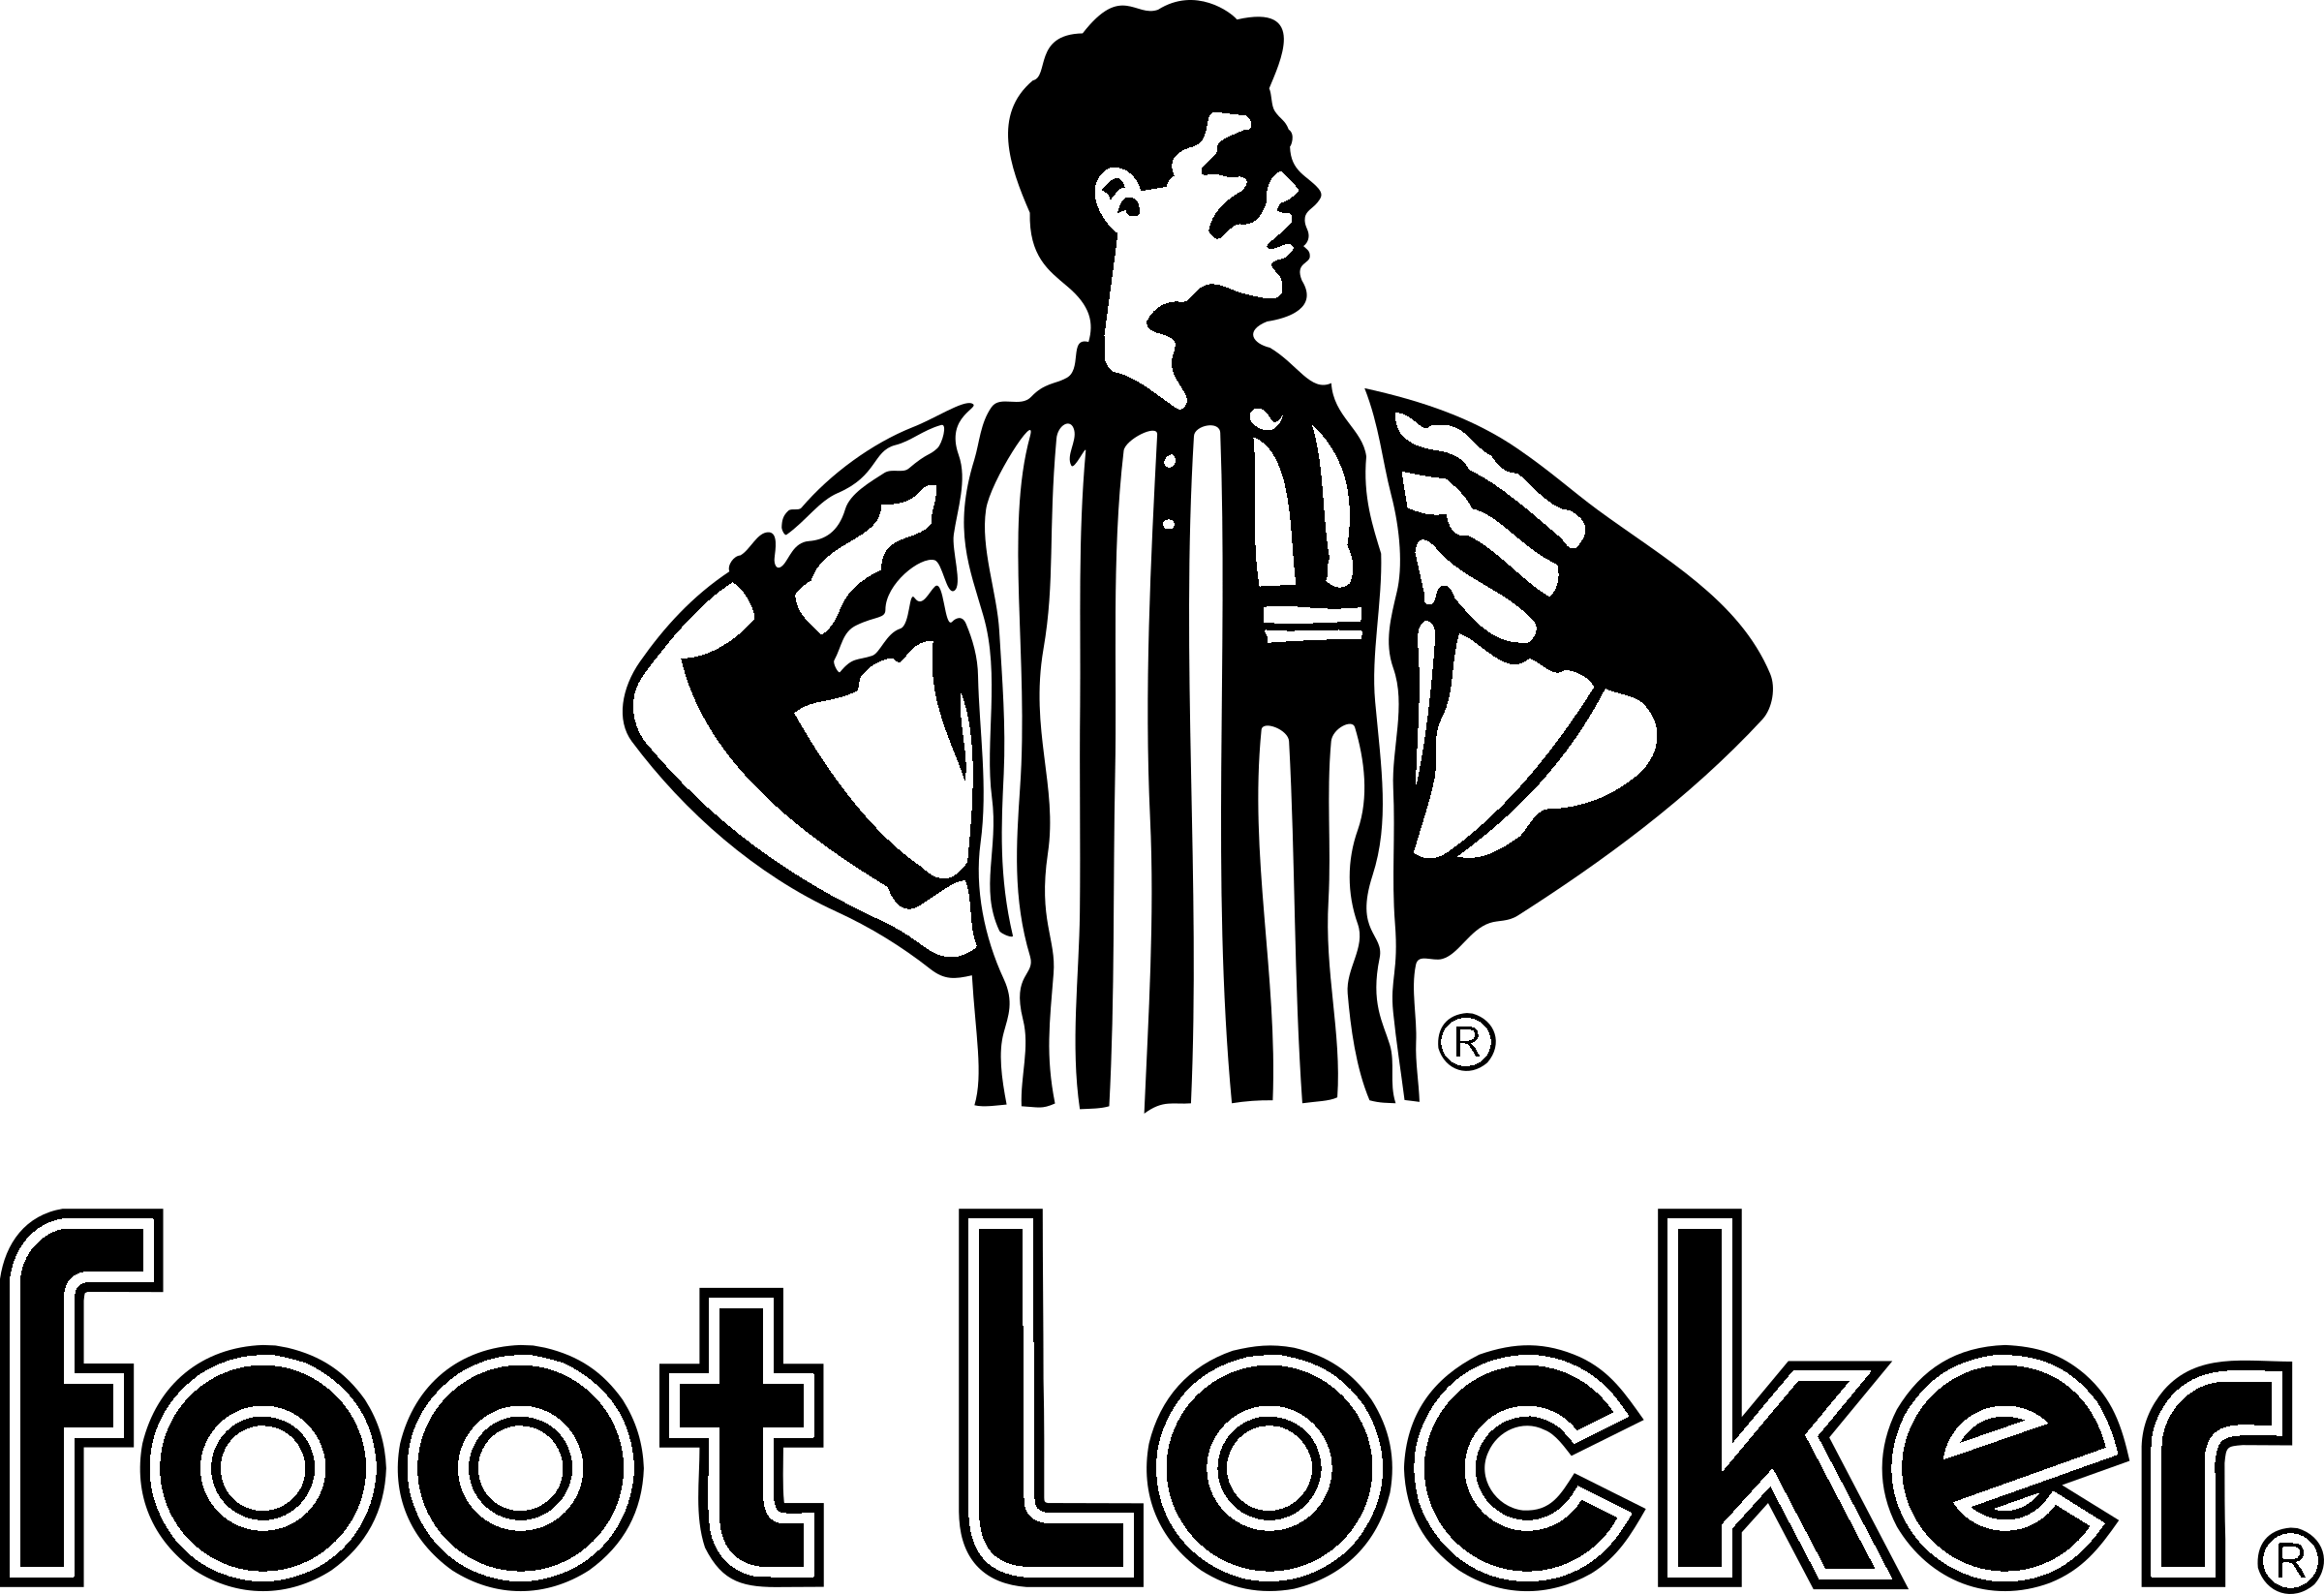 Foot and White with Wing Logo - Foot Locker Logo PNG Transparent & SVG Vector